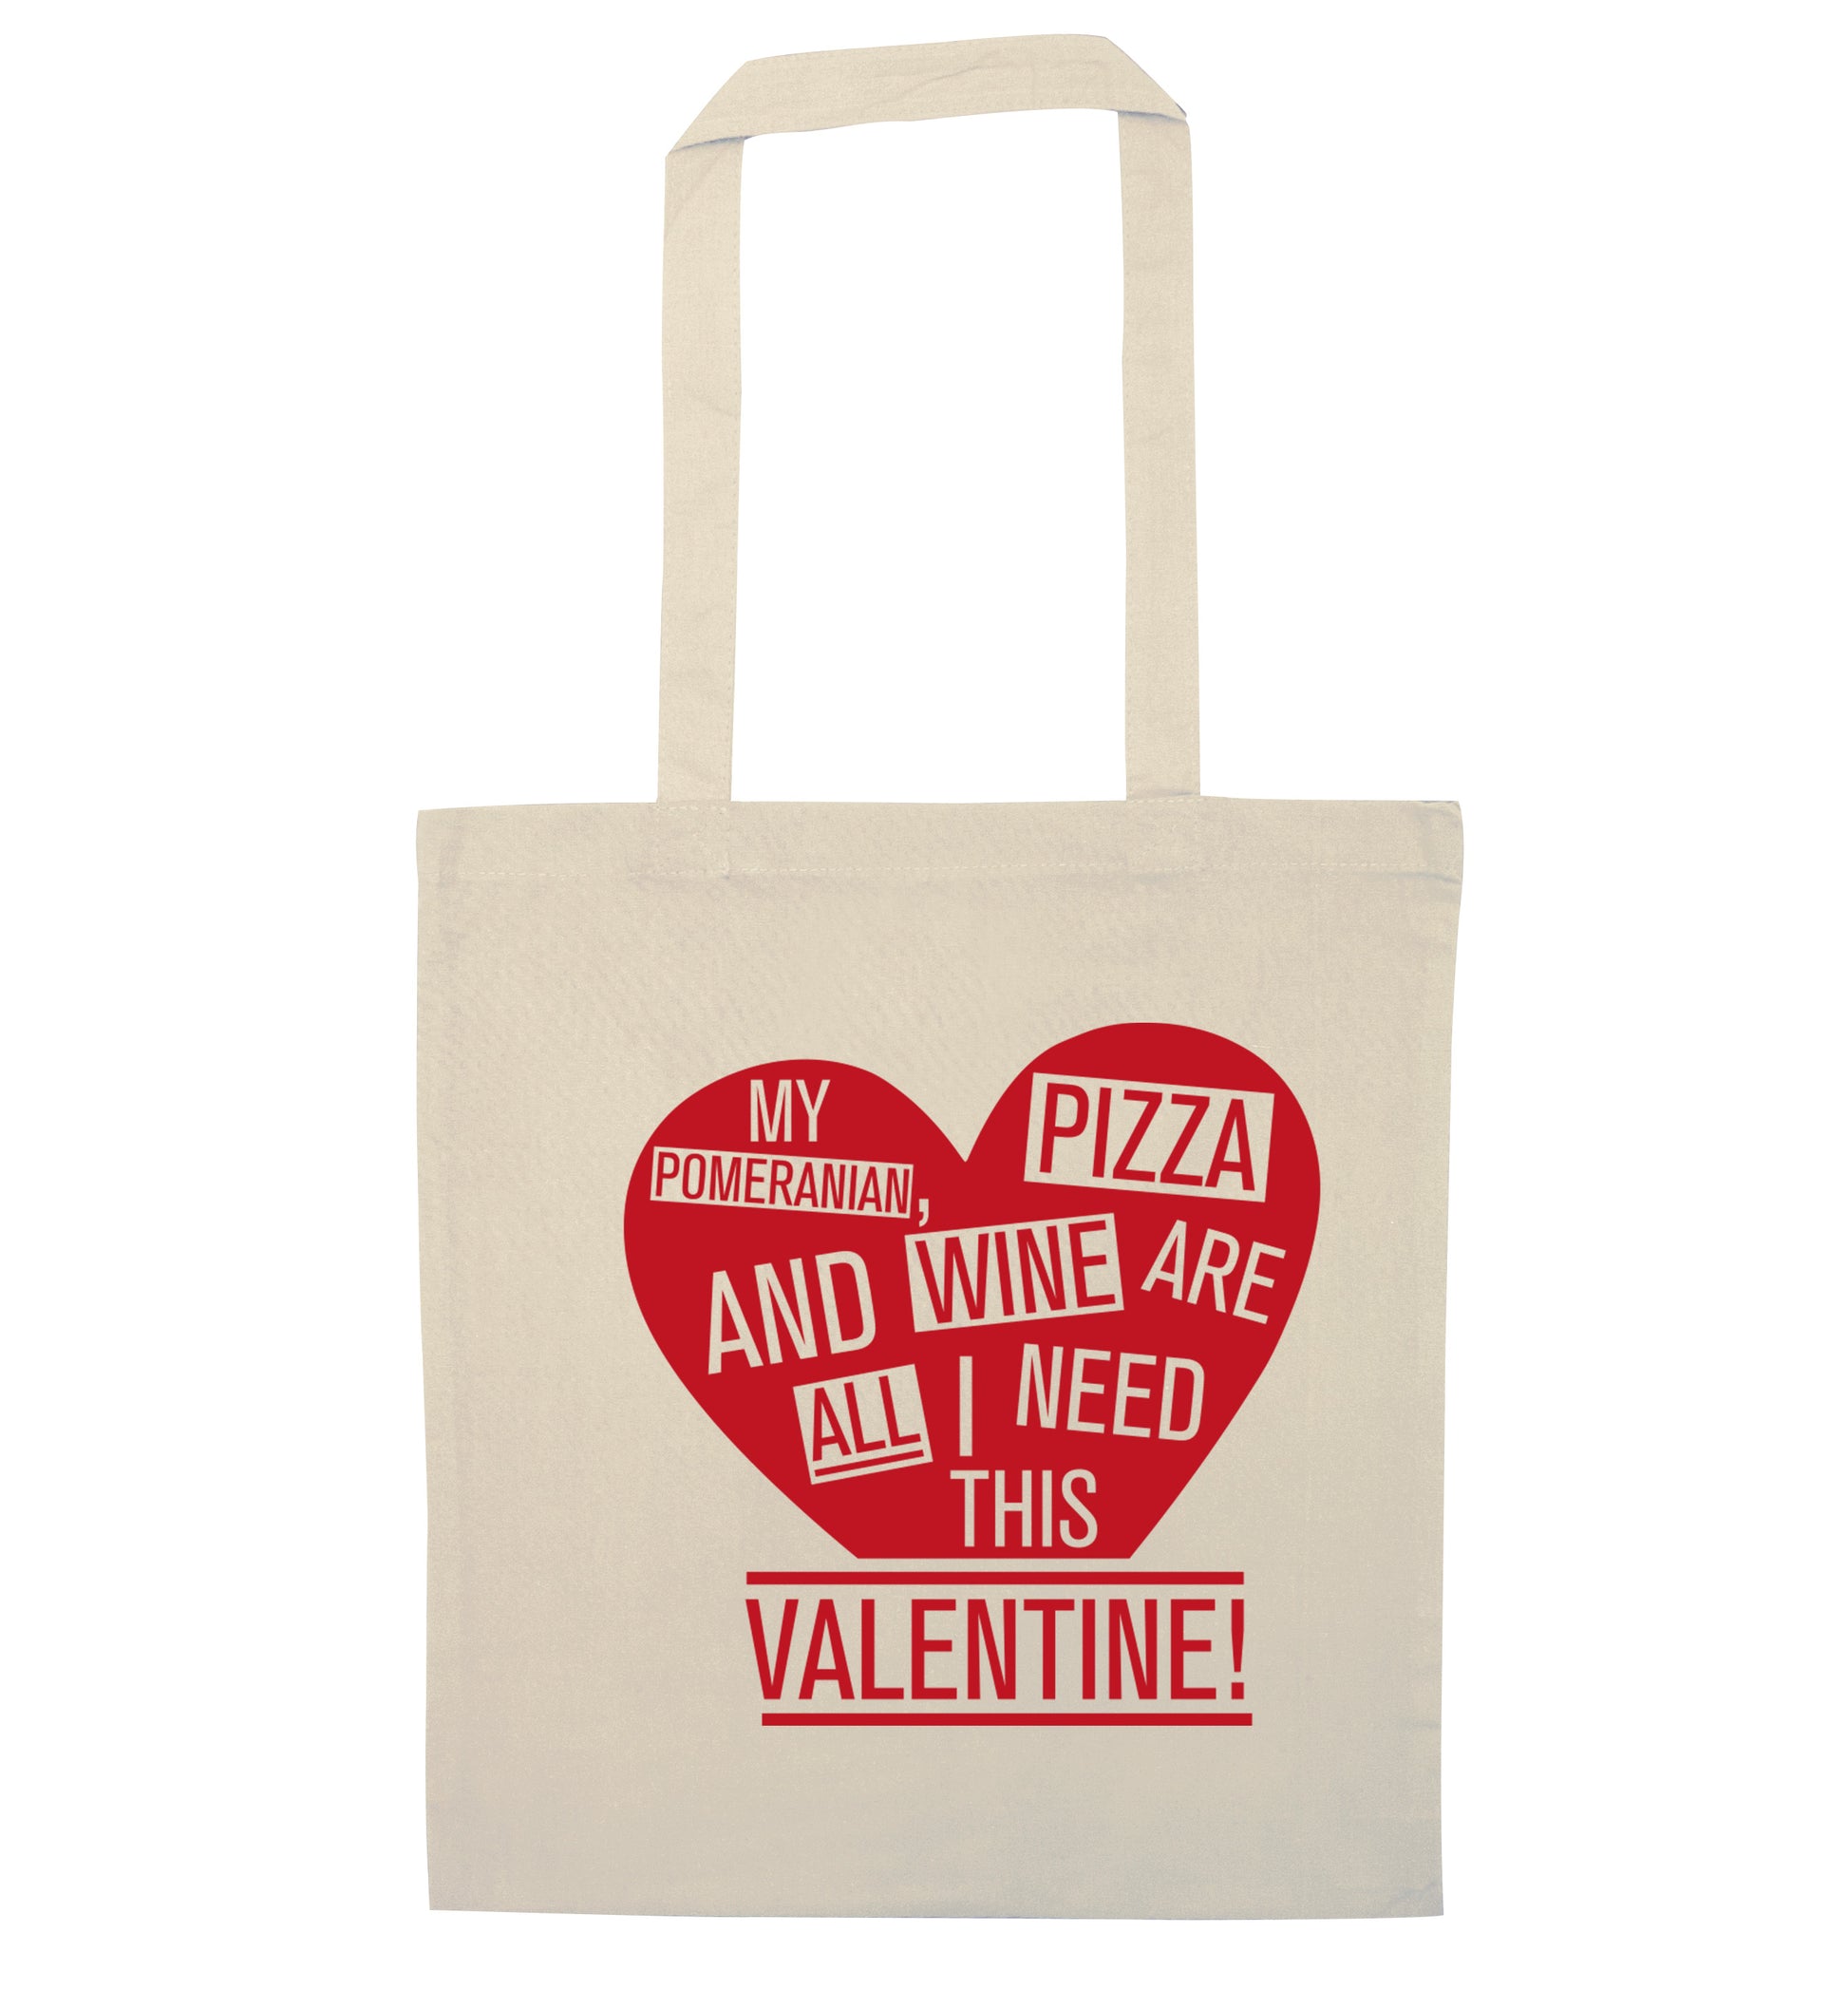 My pomeranian, chocolate and wine are all I need this valentine! natural tote bag